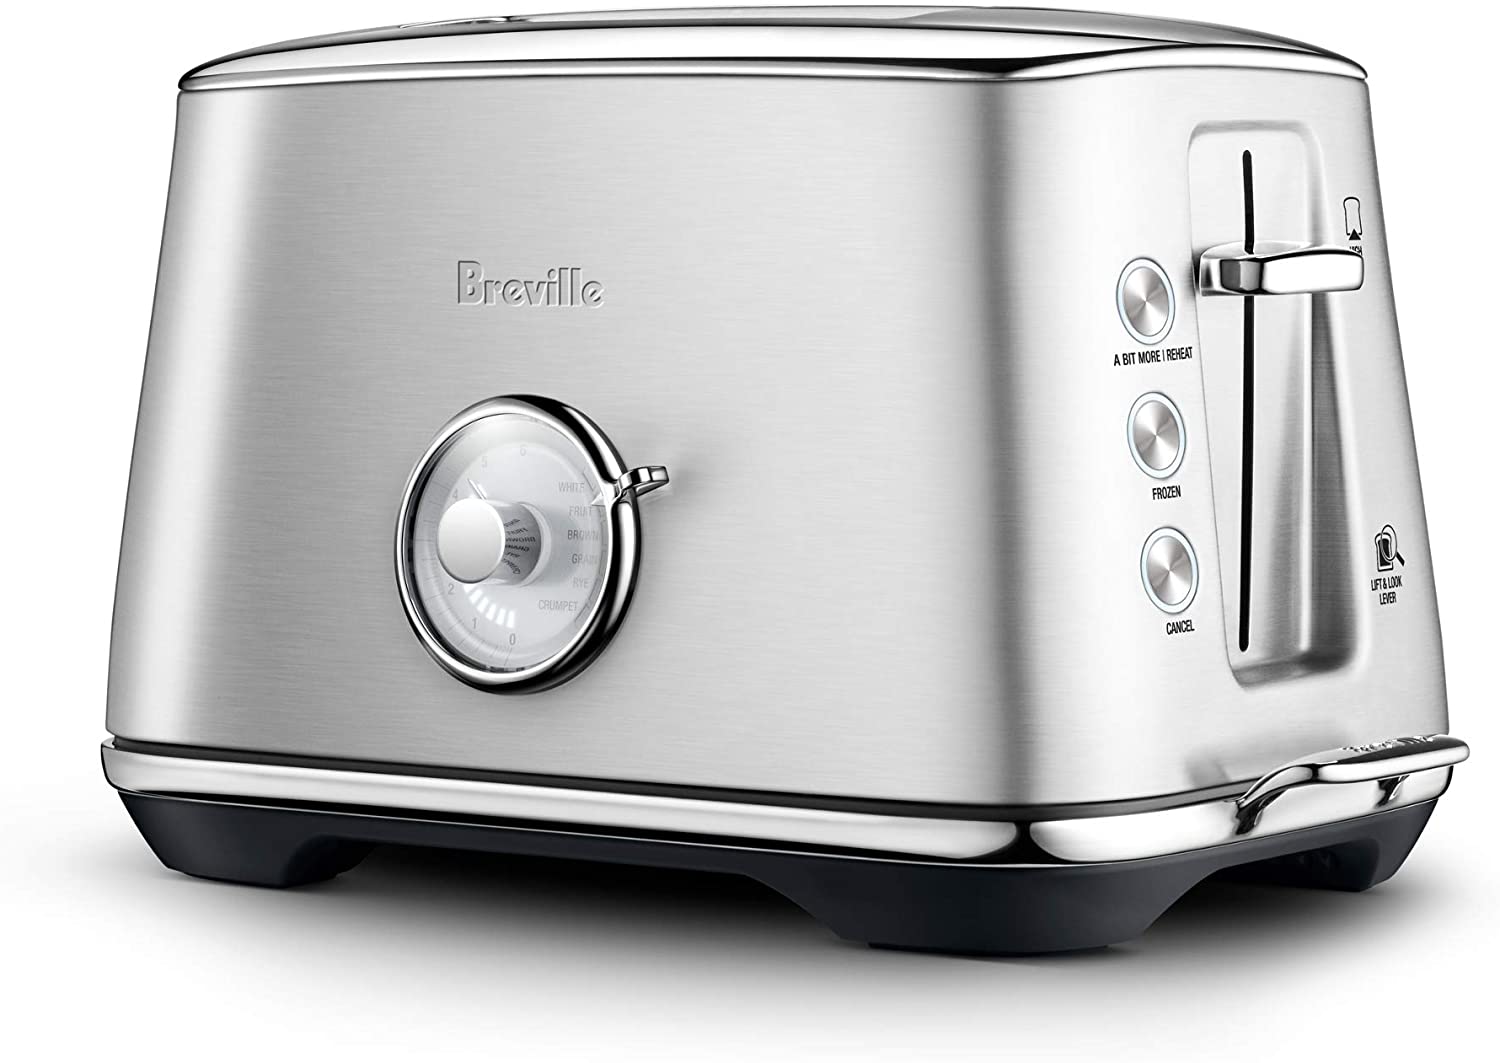 Breville 'A Bit More' Stainless 2-Slice Toaster - BTA720XL